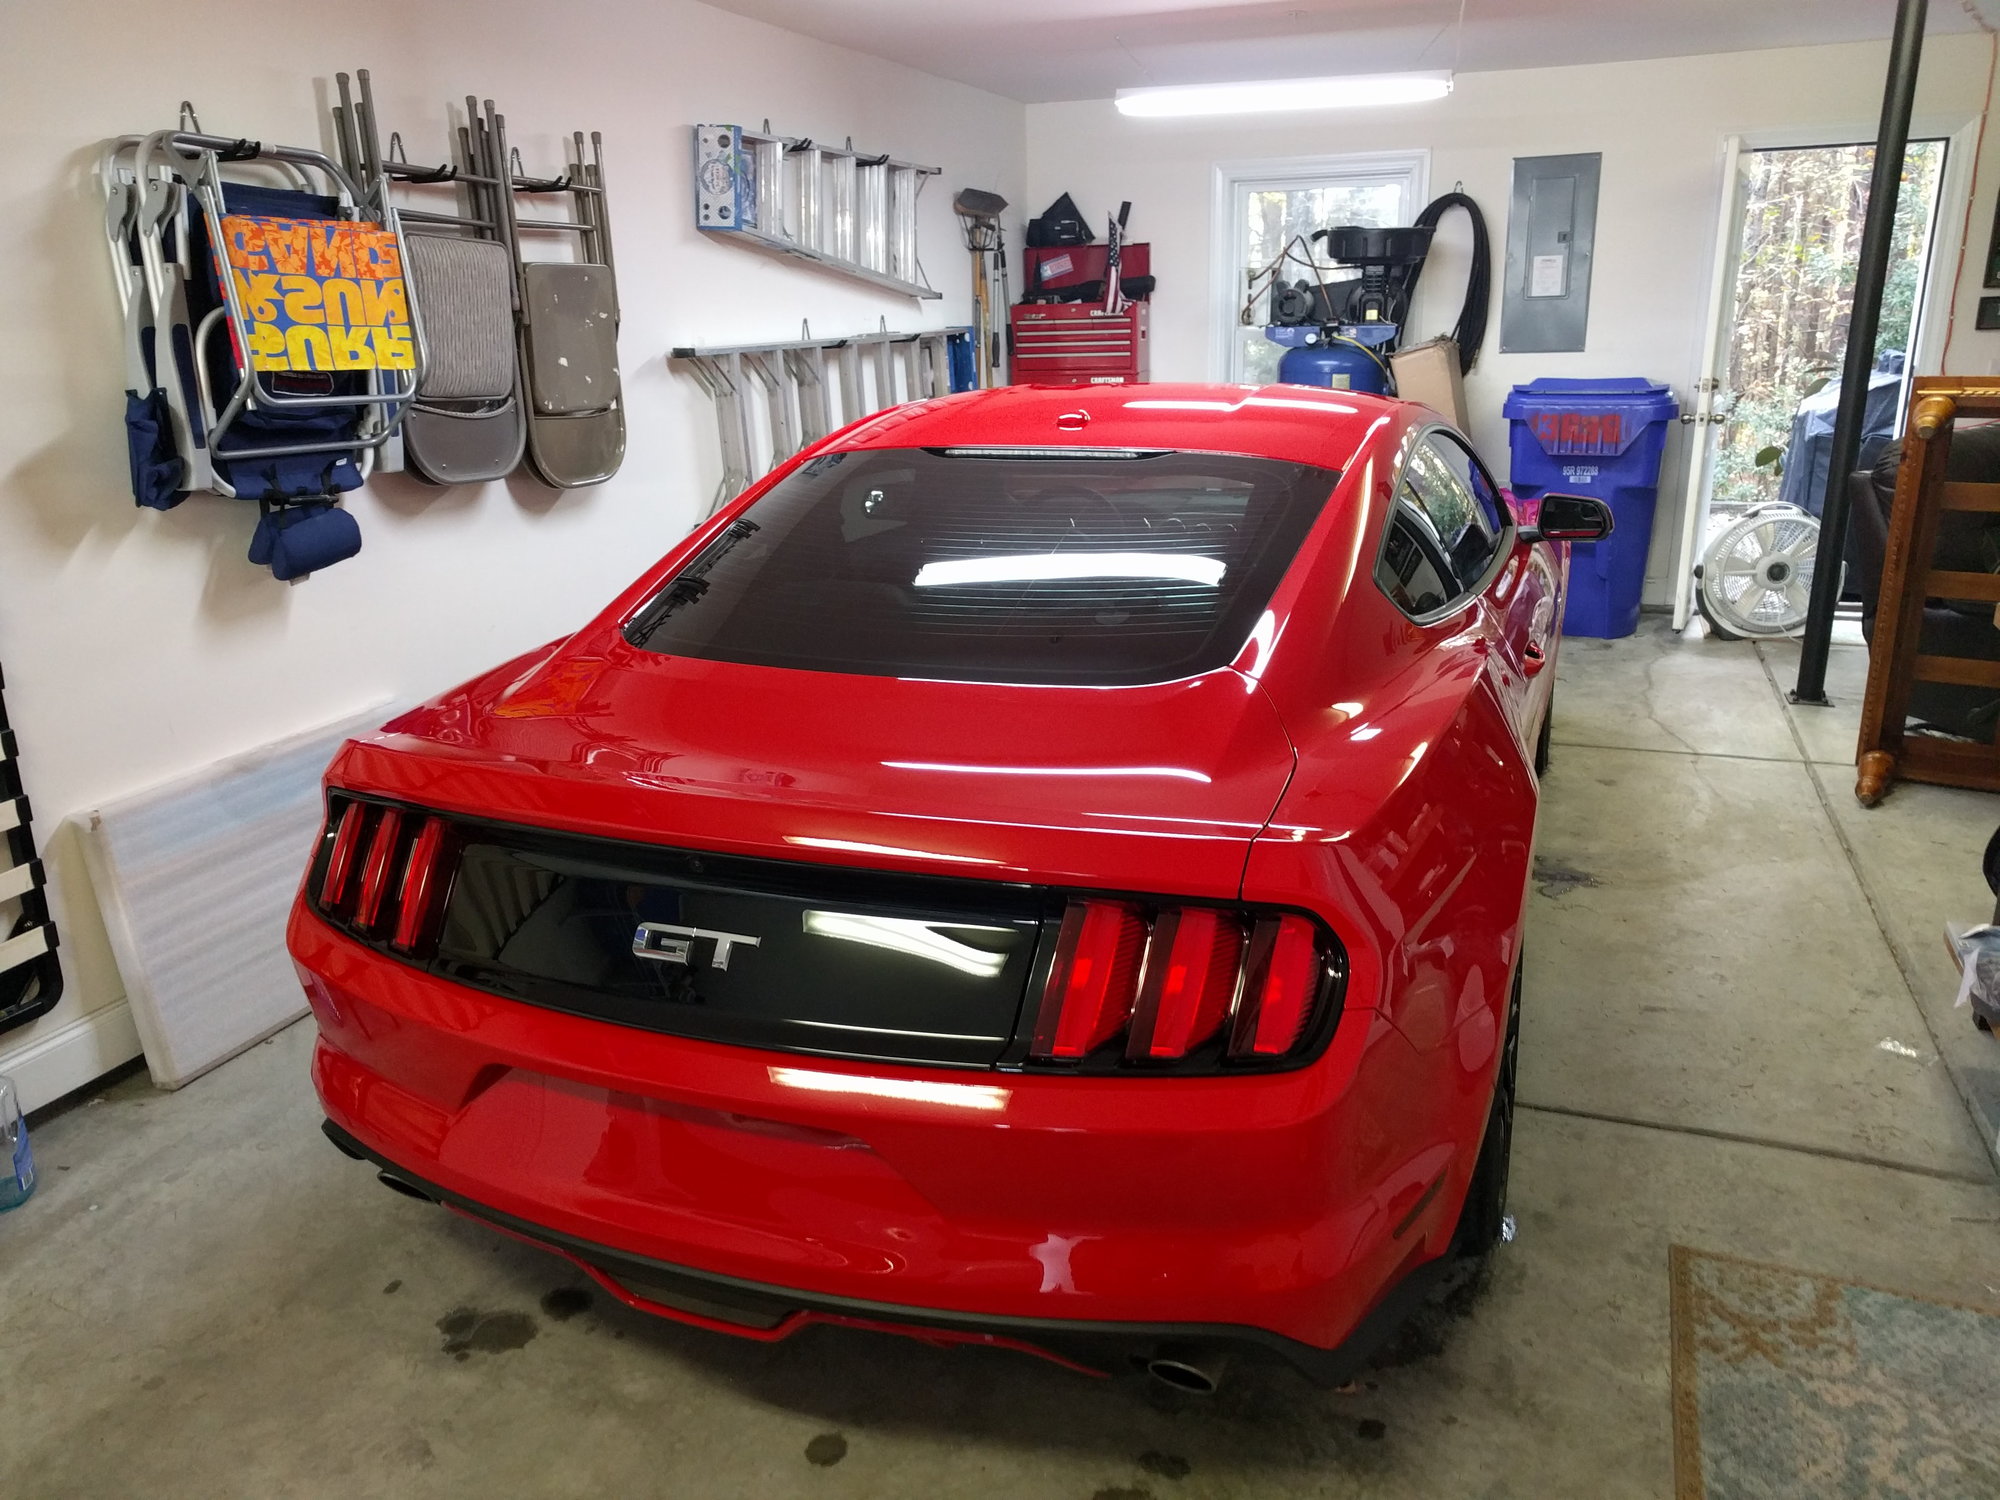 How To Use Clay Bar - Chemical Guys Detailing Clay Bar Professional Ford  Mustang 